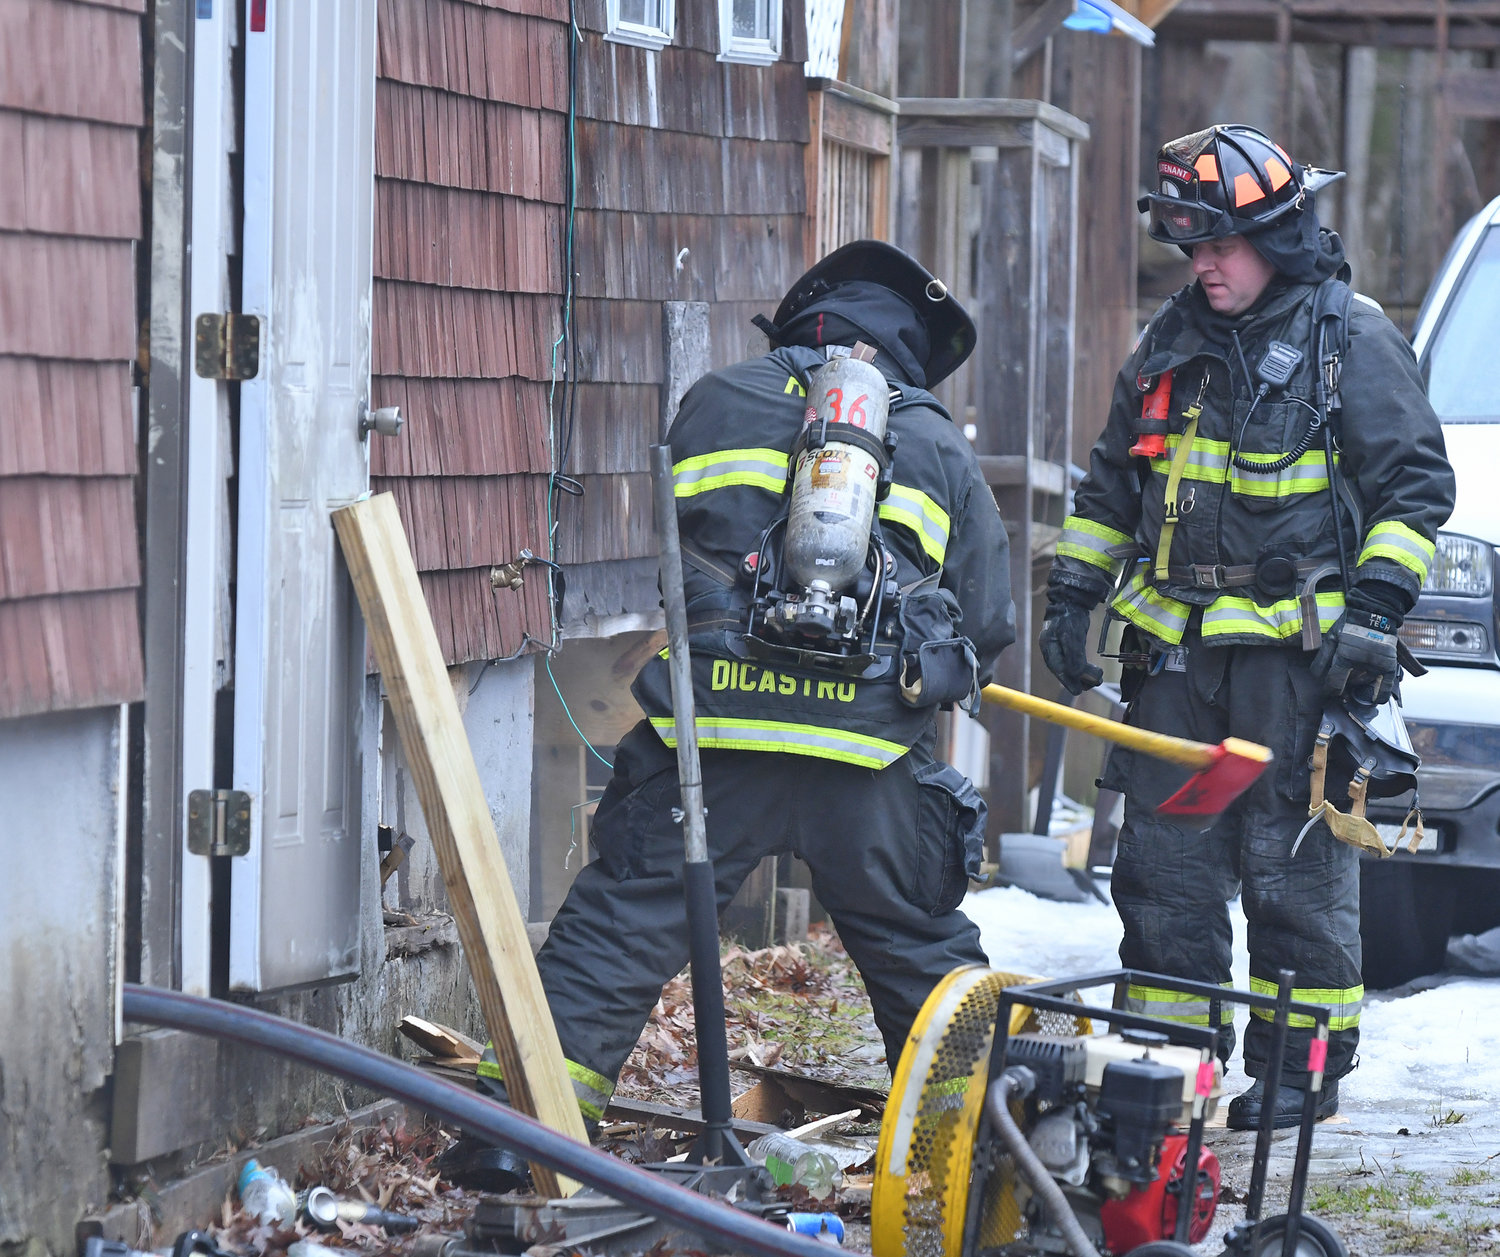 Rome Firefighter Marco J. DiCastro and Lt. Phillip J. Deihl use an axe to open up a basement window to evacuate smoke from a house fire at 309 N. Levitt St. Friday morning.